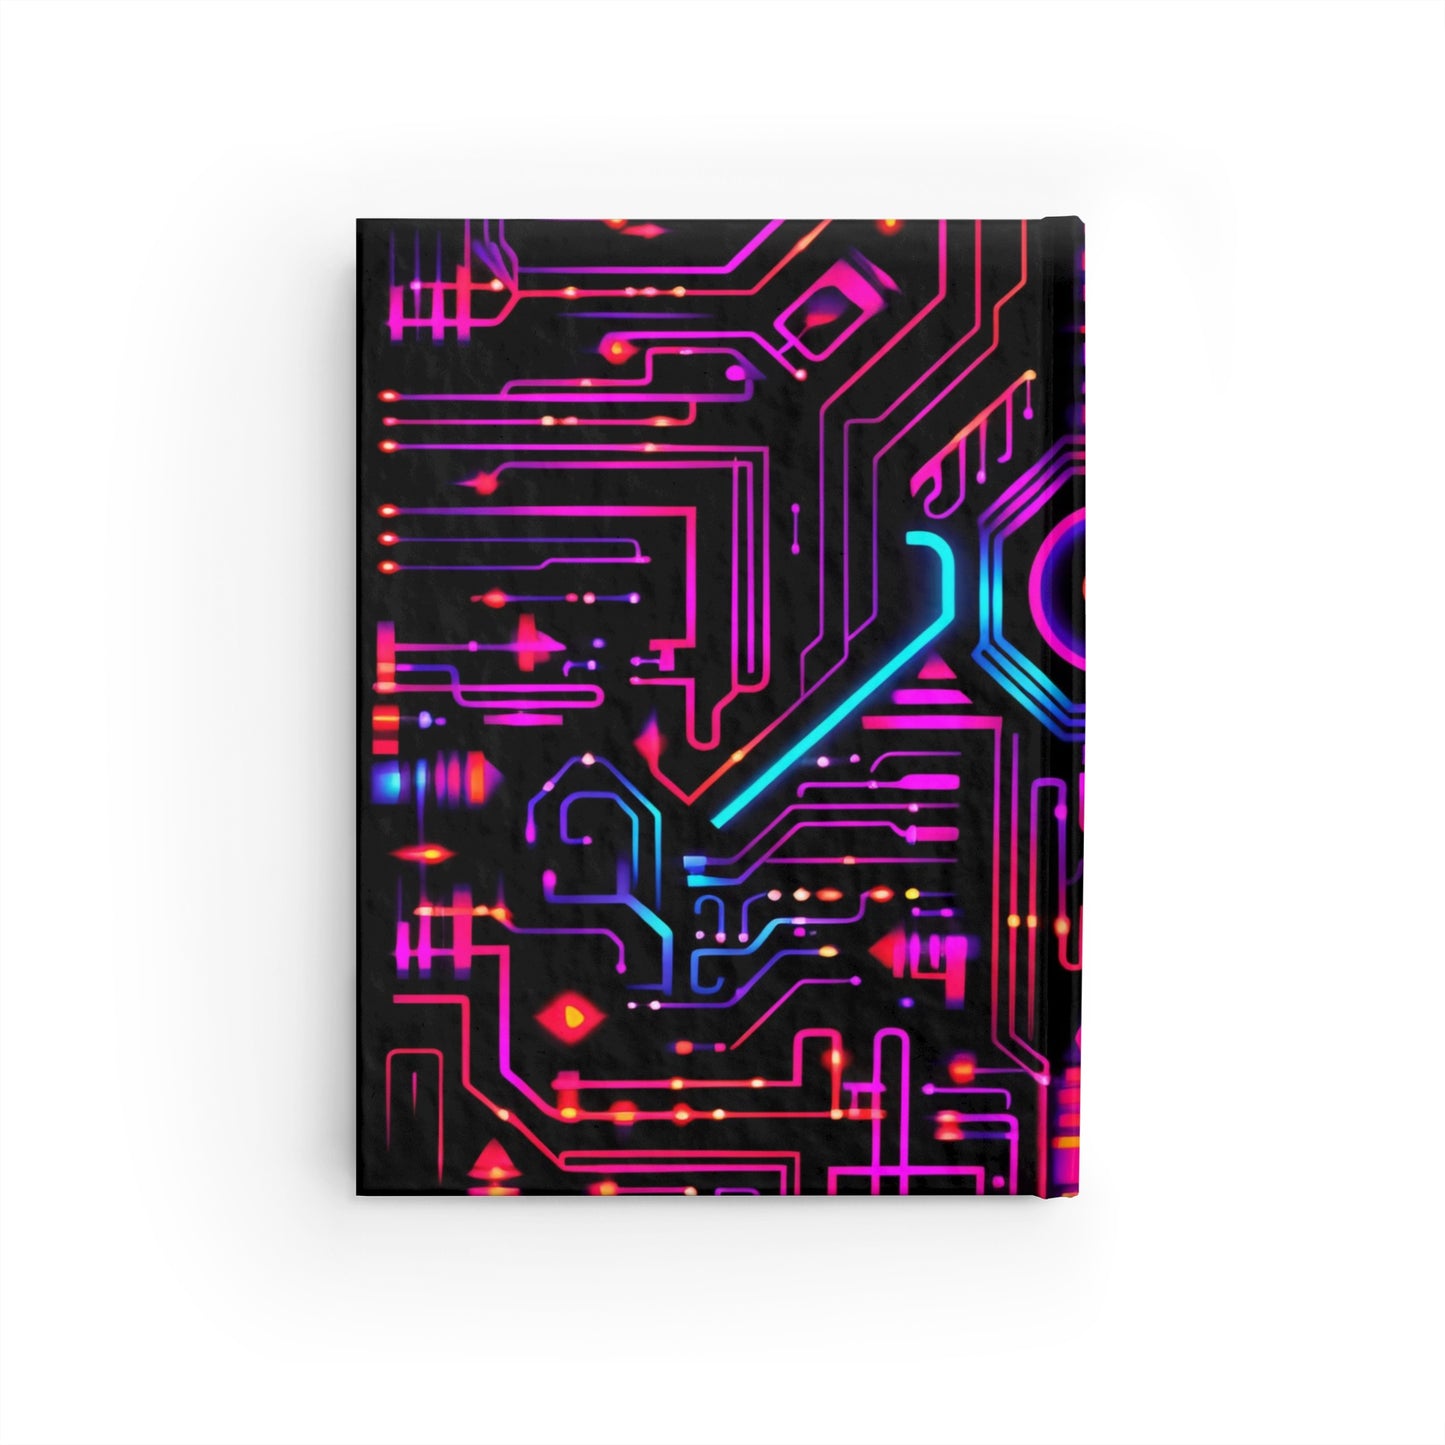 Cyberpunk Circuit Board Journal, Purple Pink and Black Sci-Fi Diary, Computer Engineer Journal, Techy Ruled Line, Hard Cover Notebook